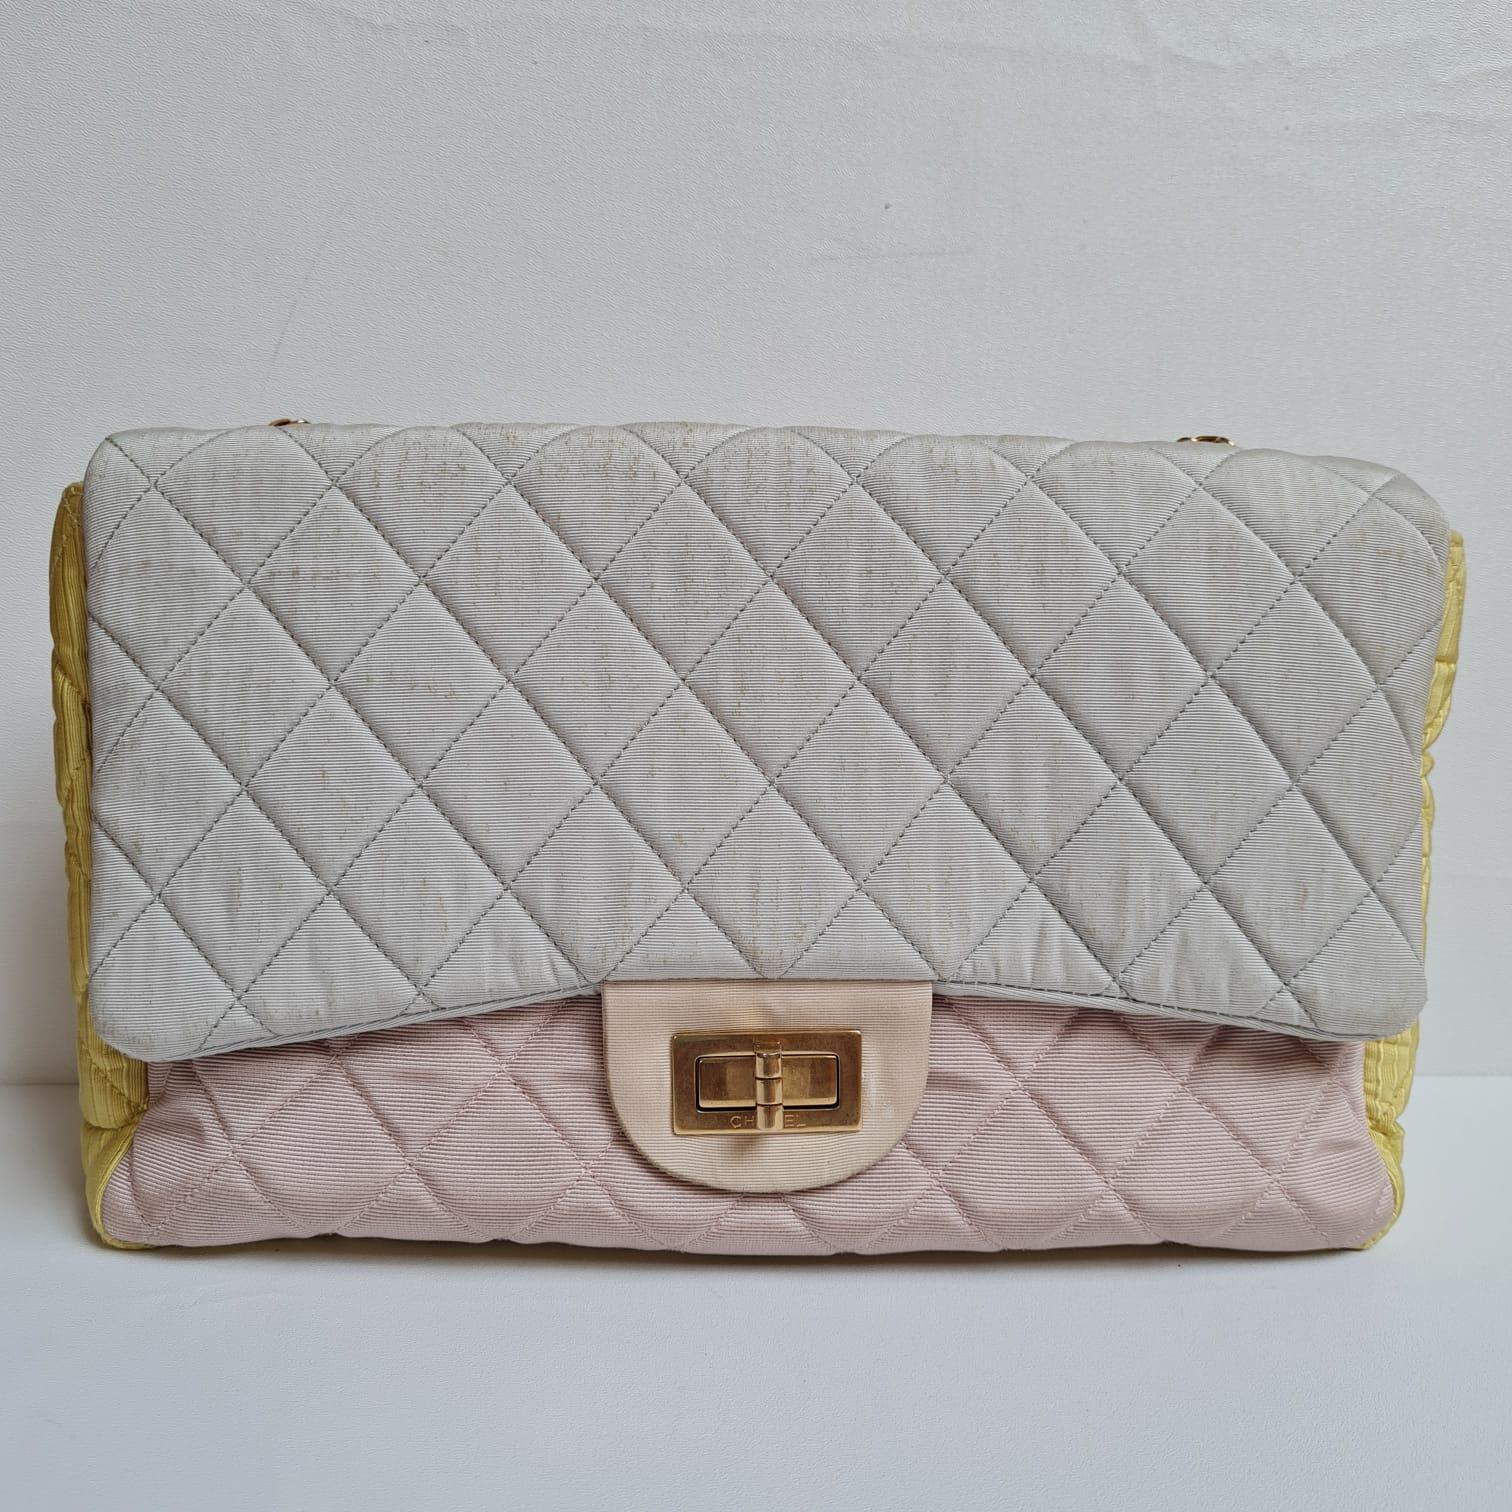 Chanel Pastel Tricolor 2.55 Canvas Quilted 227 Reissue Flap Bag In Fair Condition For Sale In Jakarta, Daerah Khusus Ibukota Jakarta